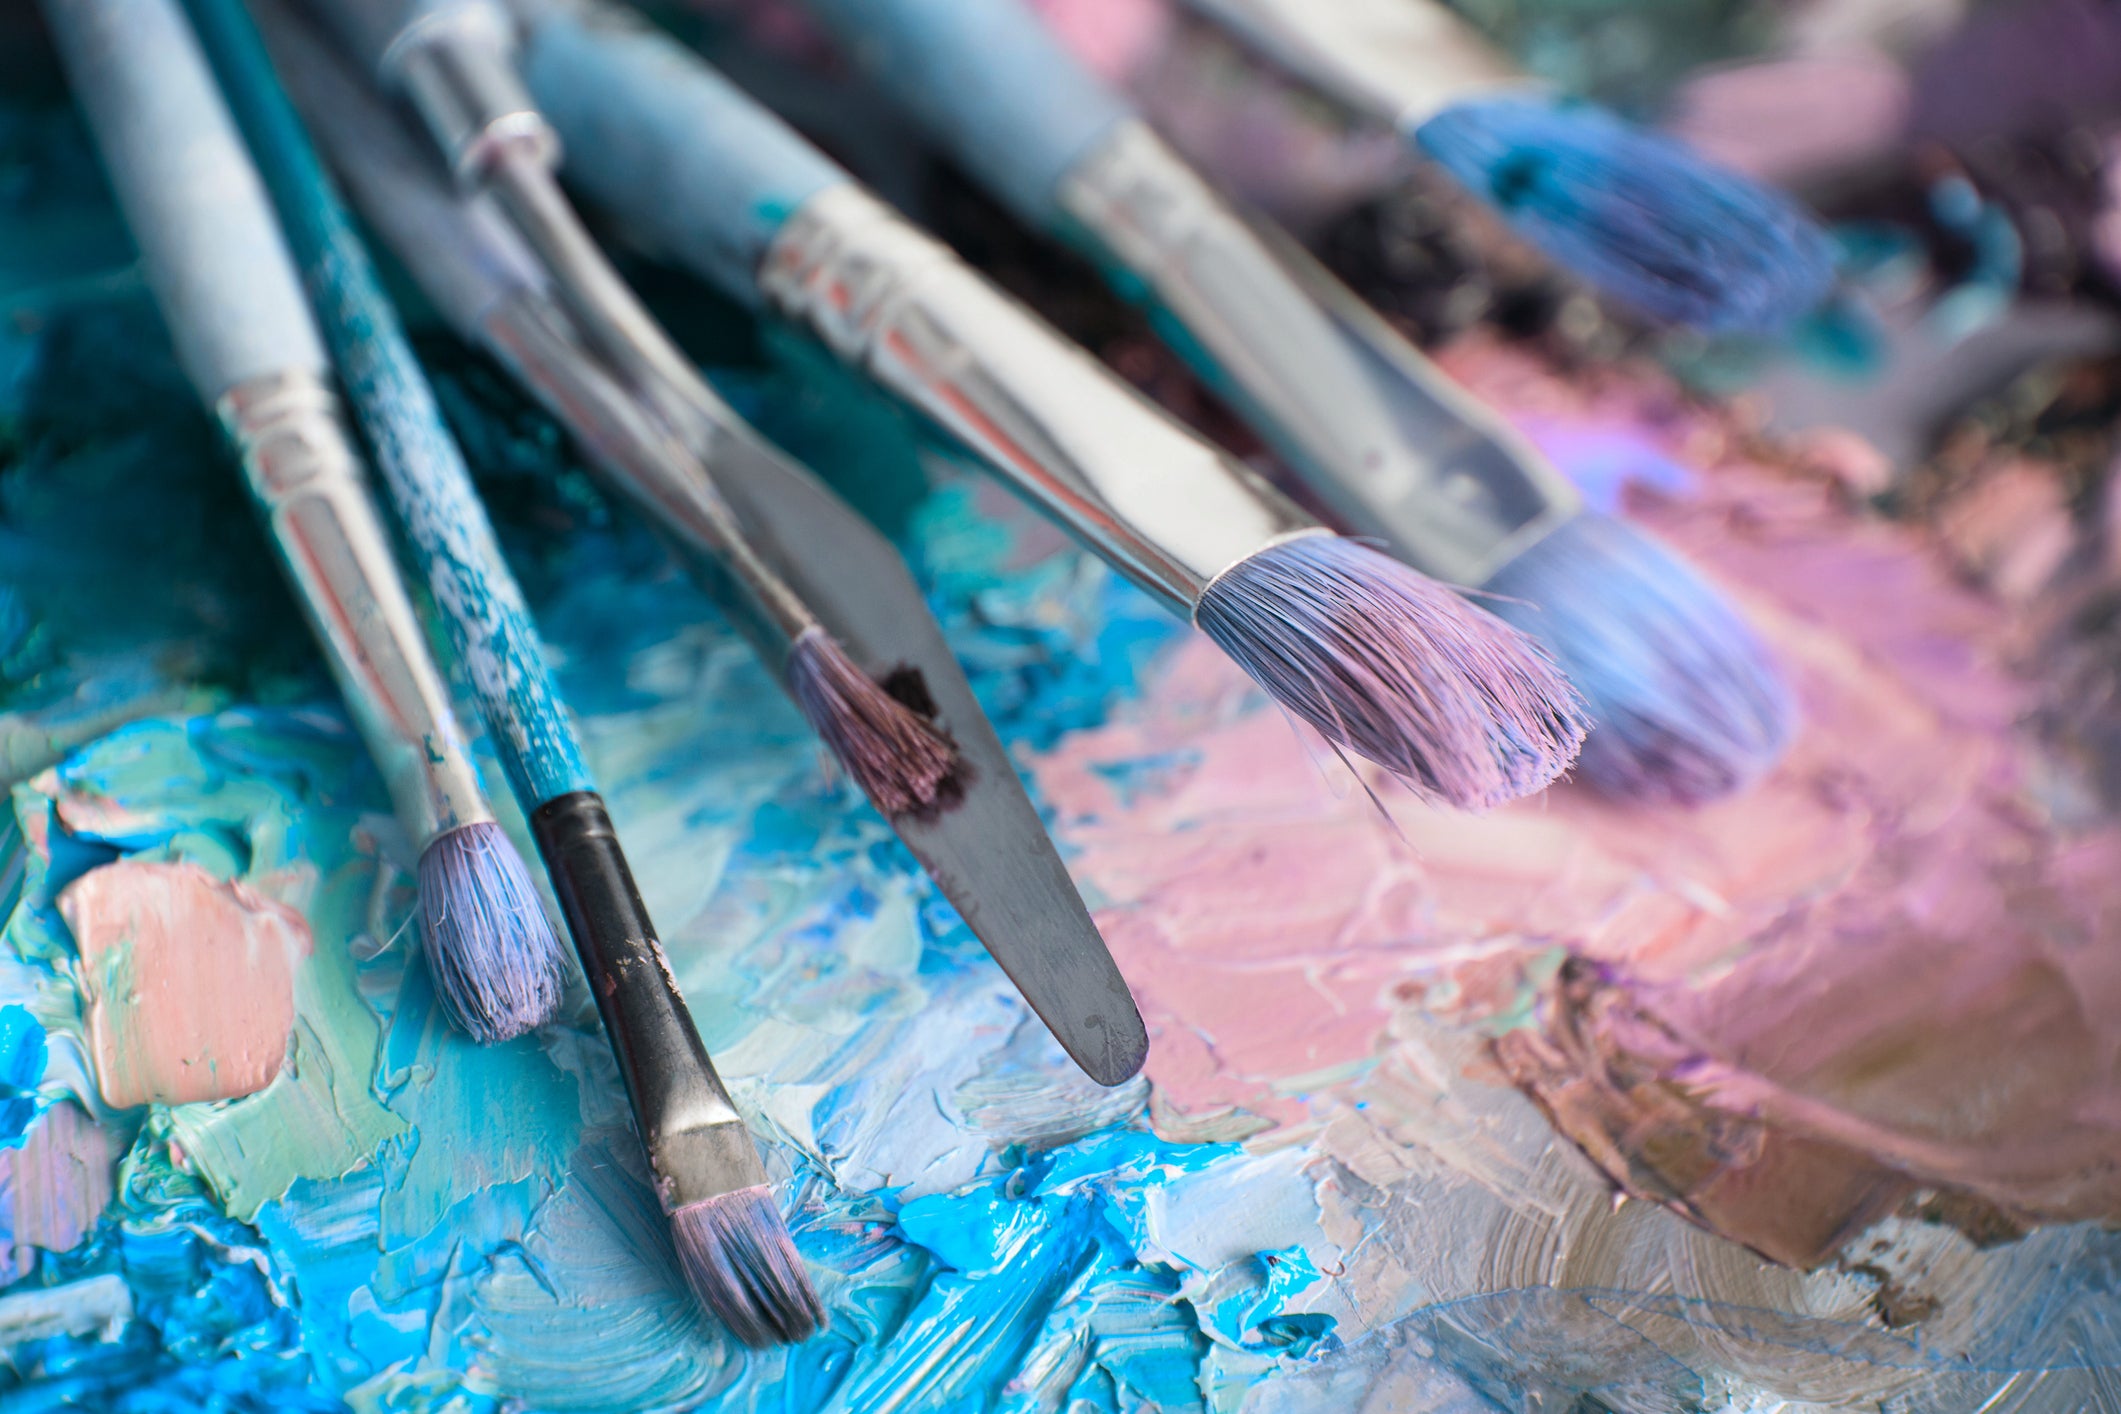 A close up of paintbrushes